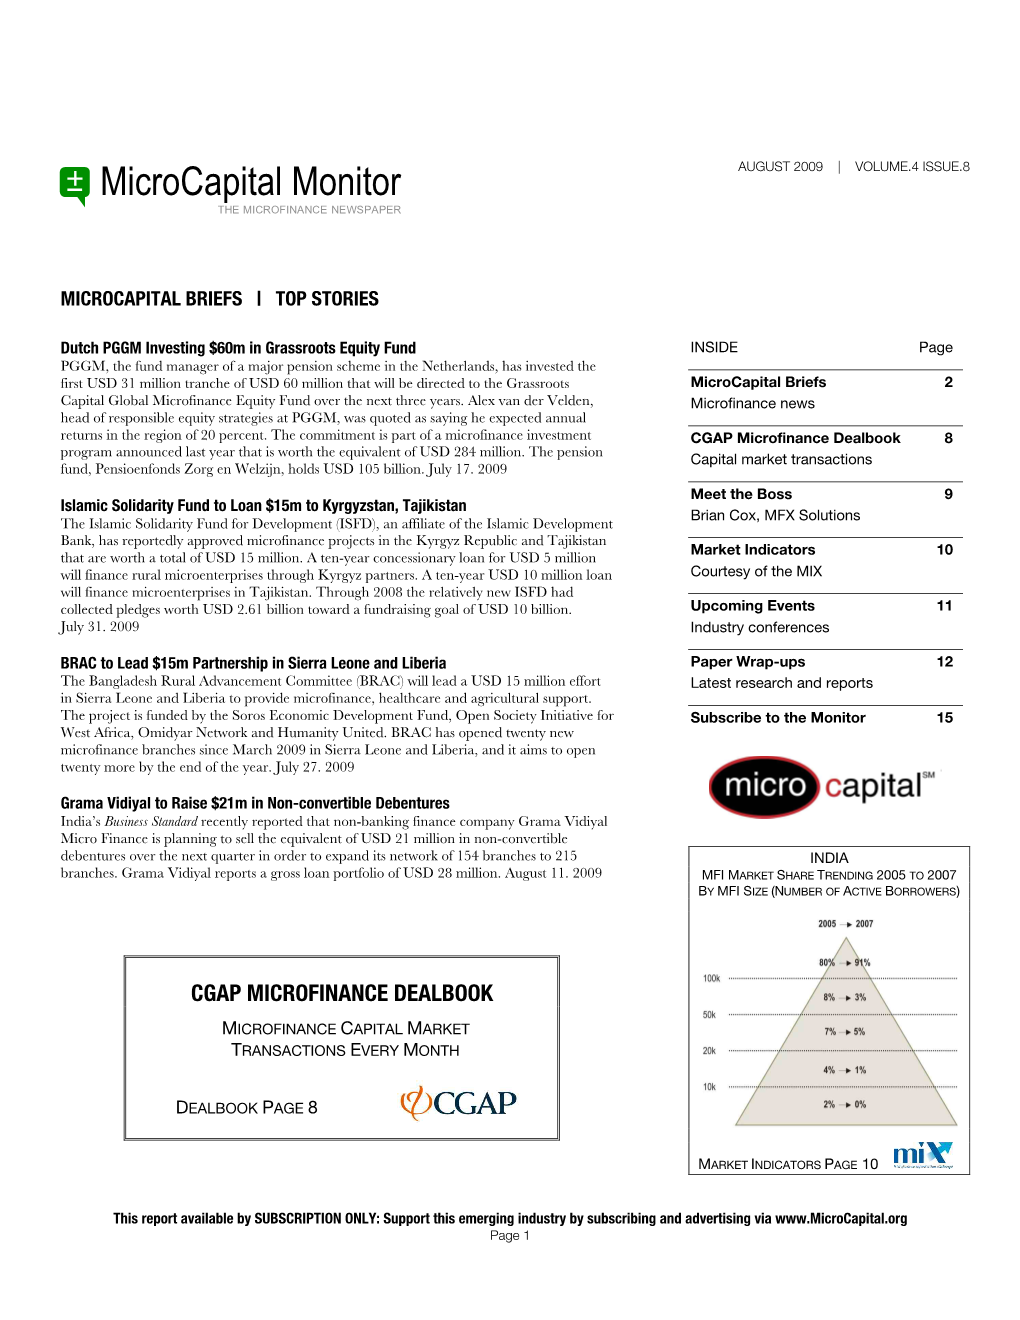 Microcapital Monitor AUGUST 2009 | VOLUME.4 ISSUE.8 the MICROFINANCE NEWSPAPER